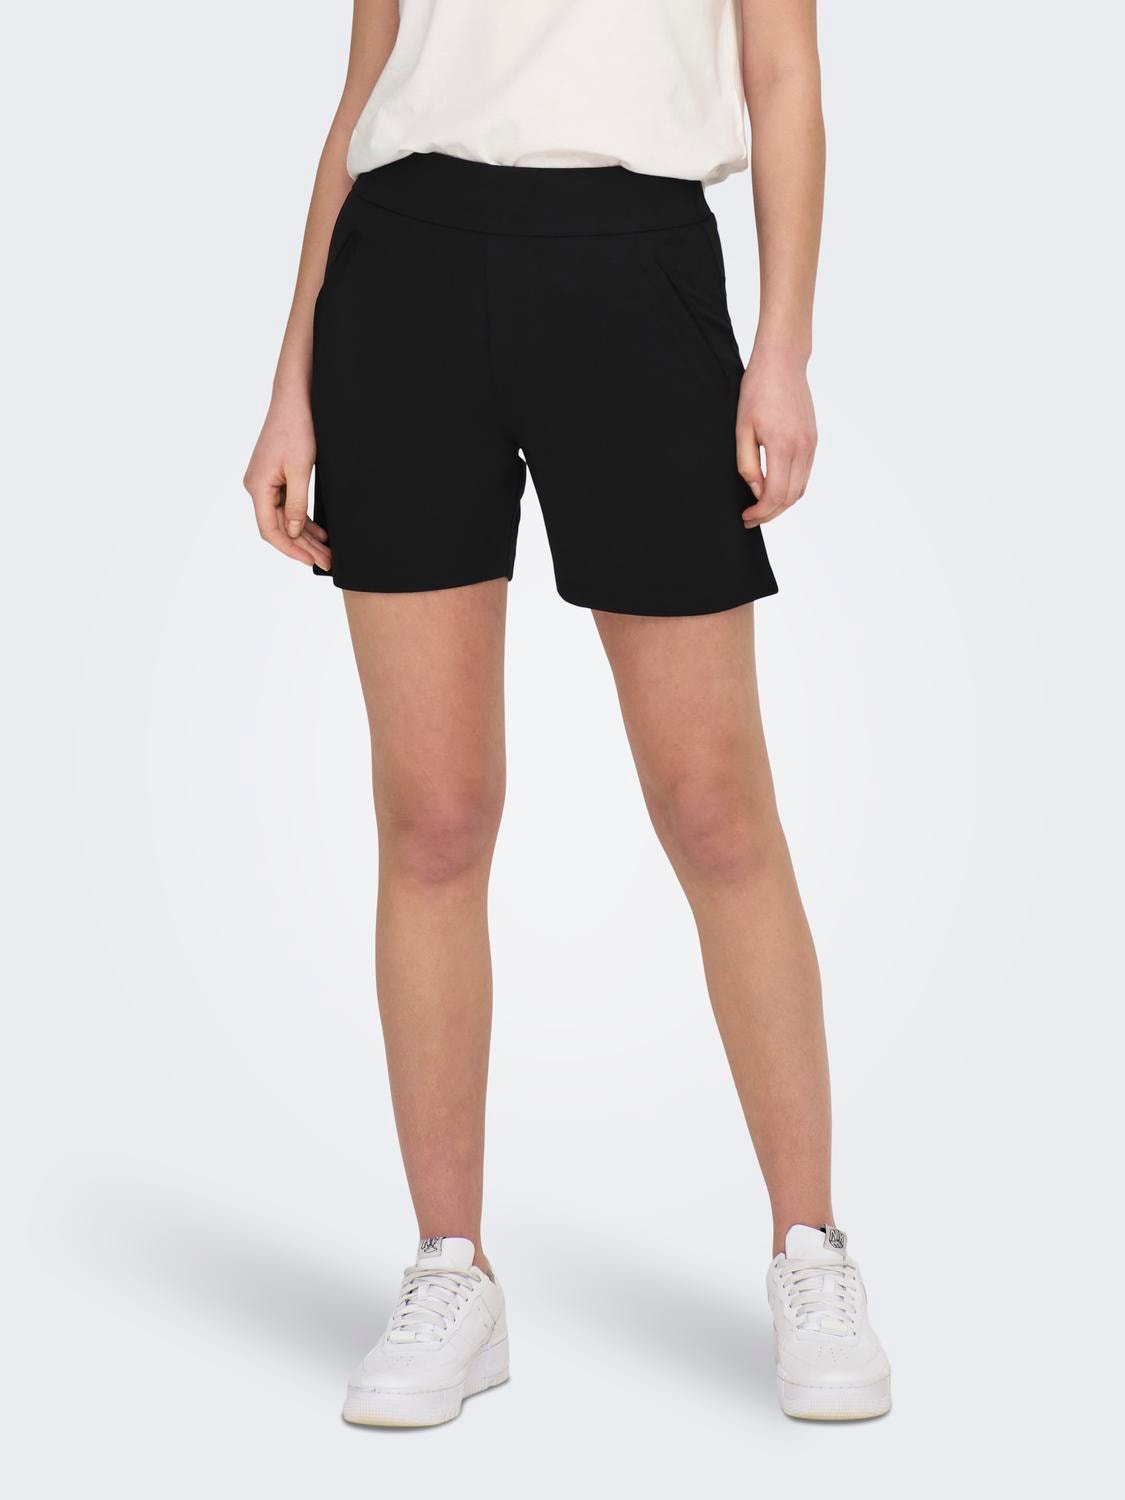 ONLY Shorts Corte loose -Black - 15289586